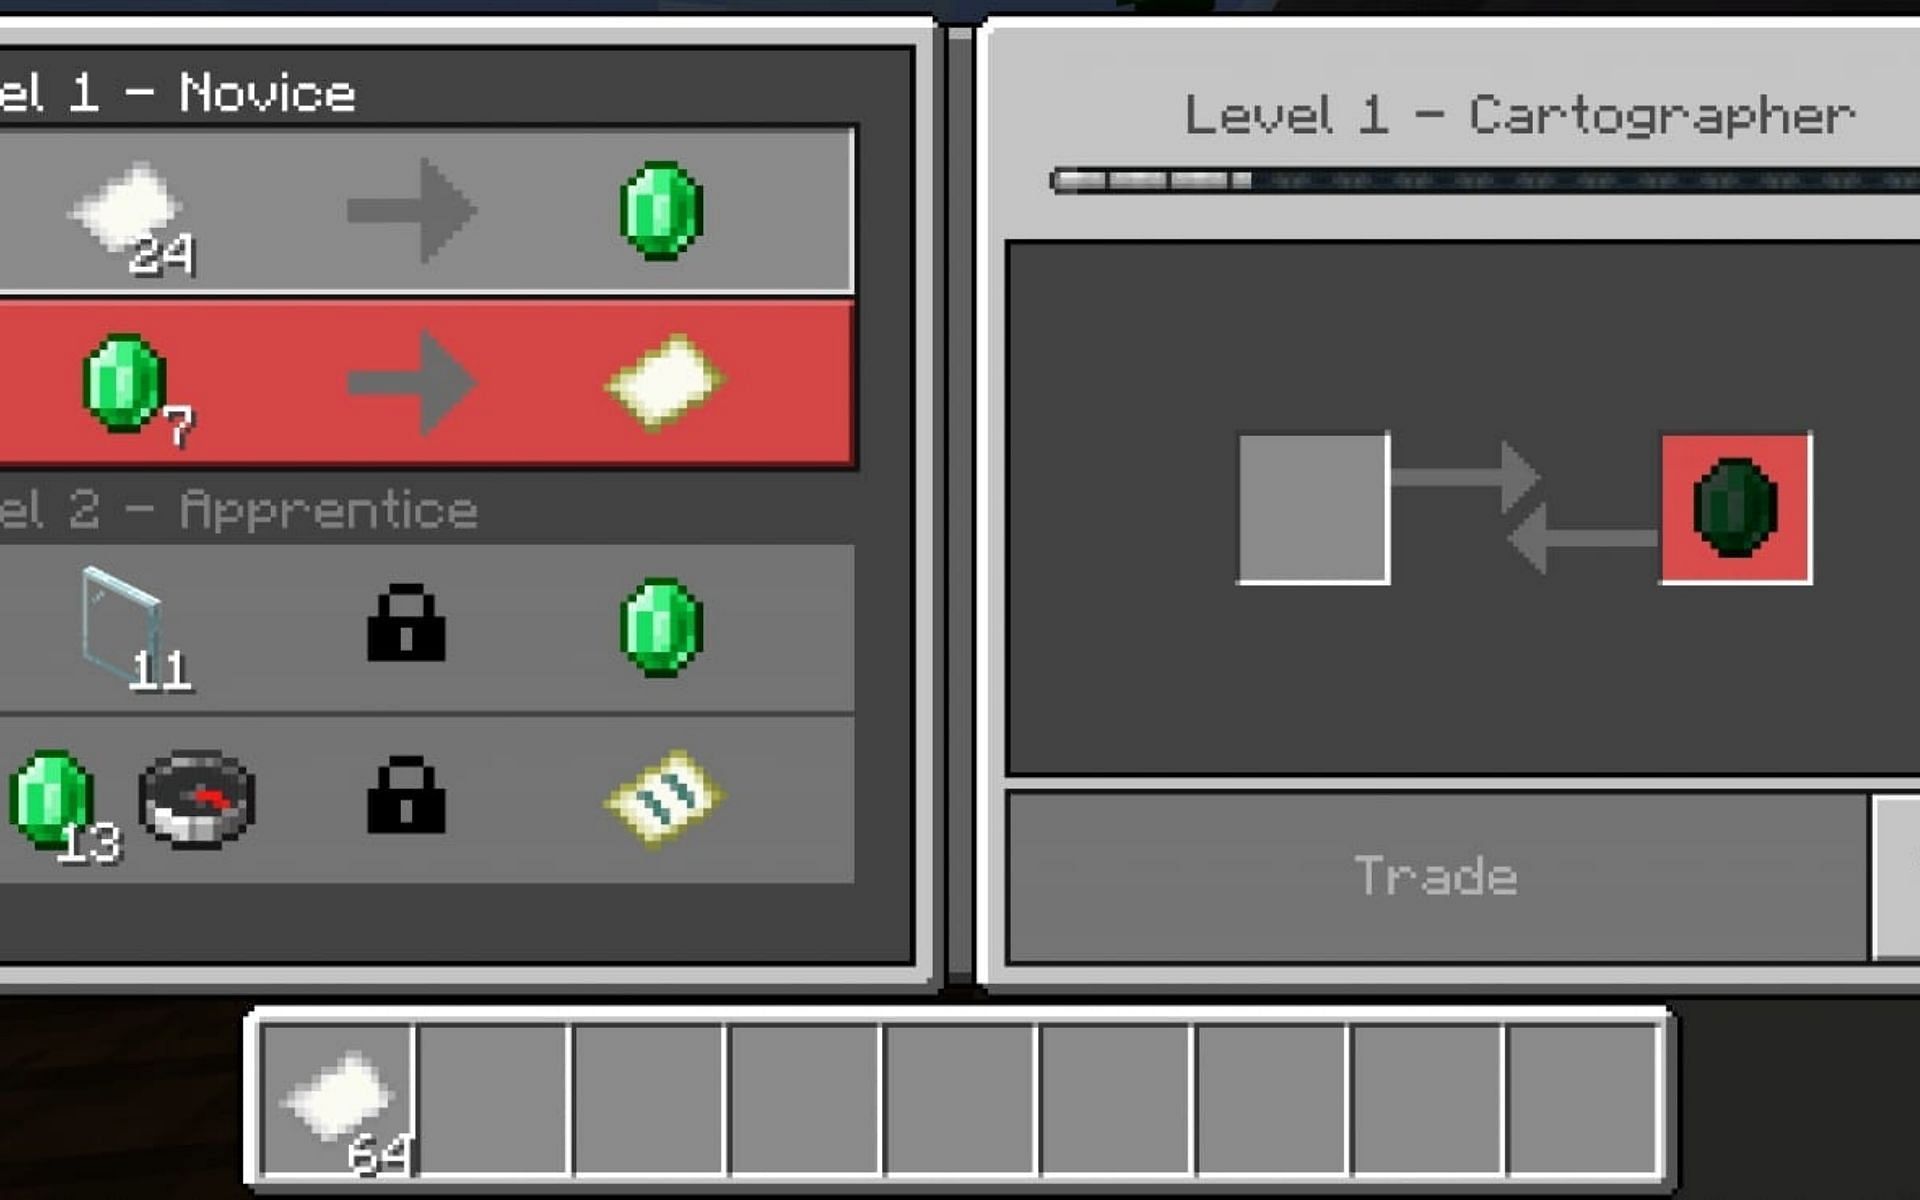 Trade offered by Cartographer (Image via Minecraft)